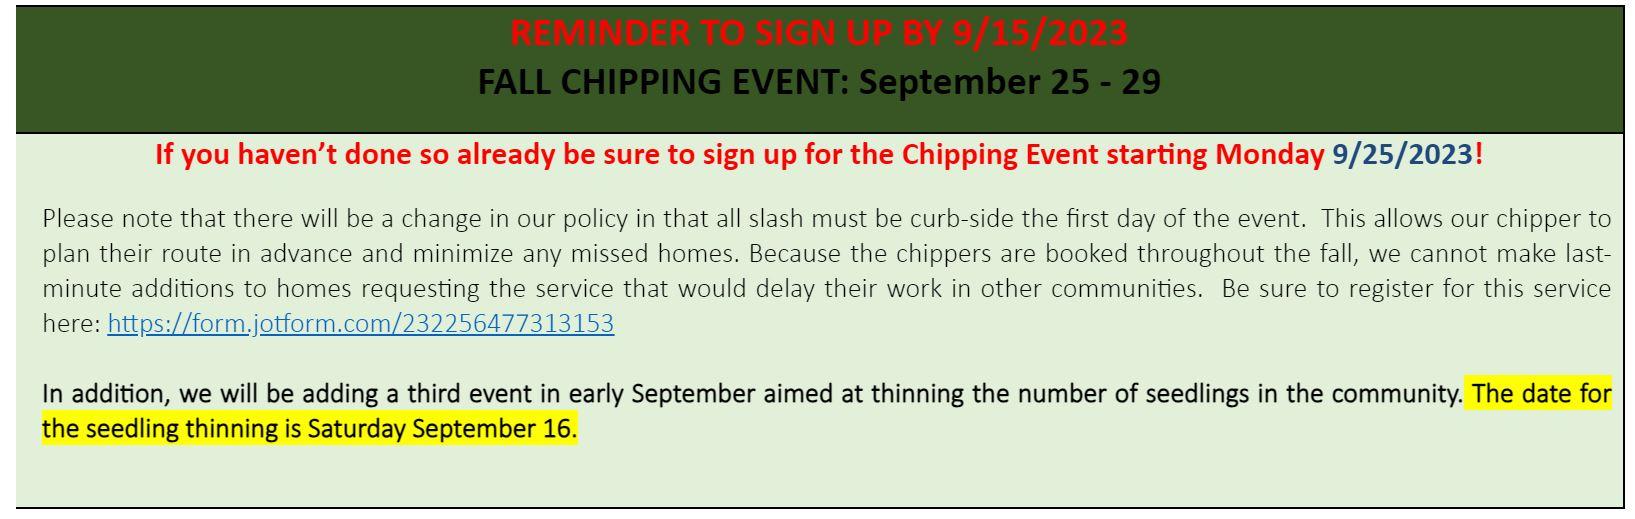 Fall chipping event